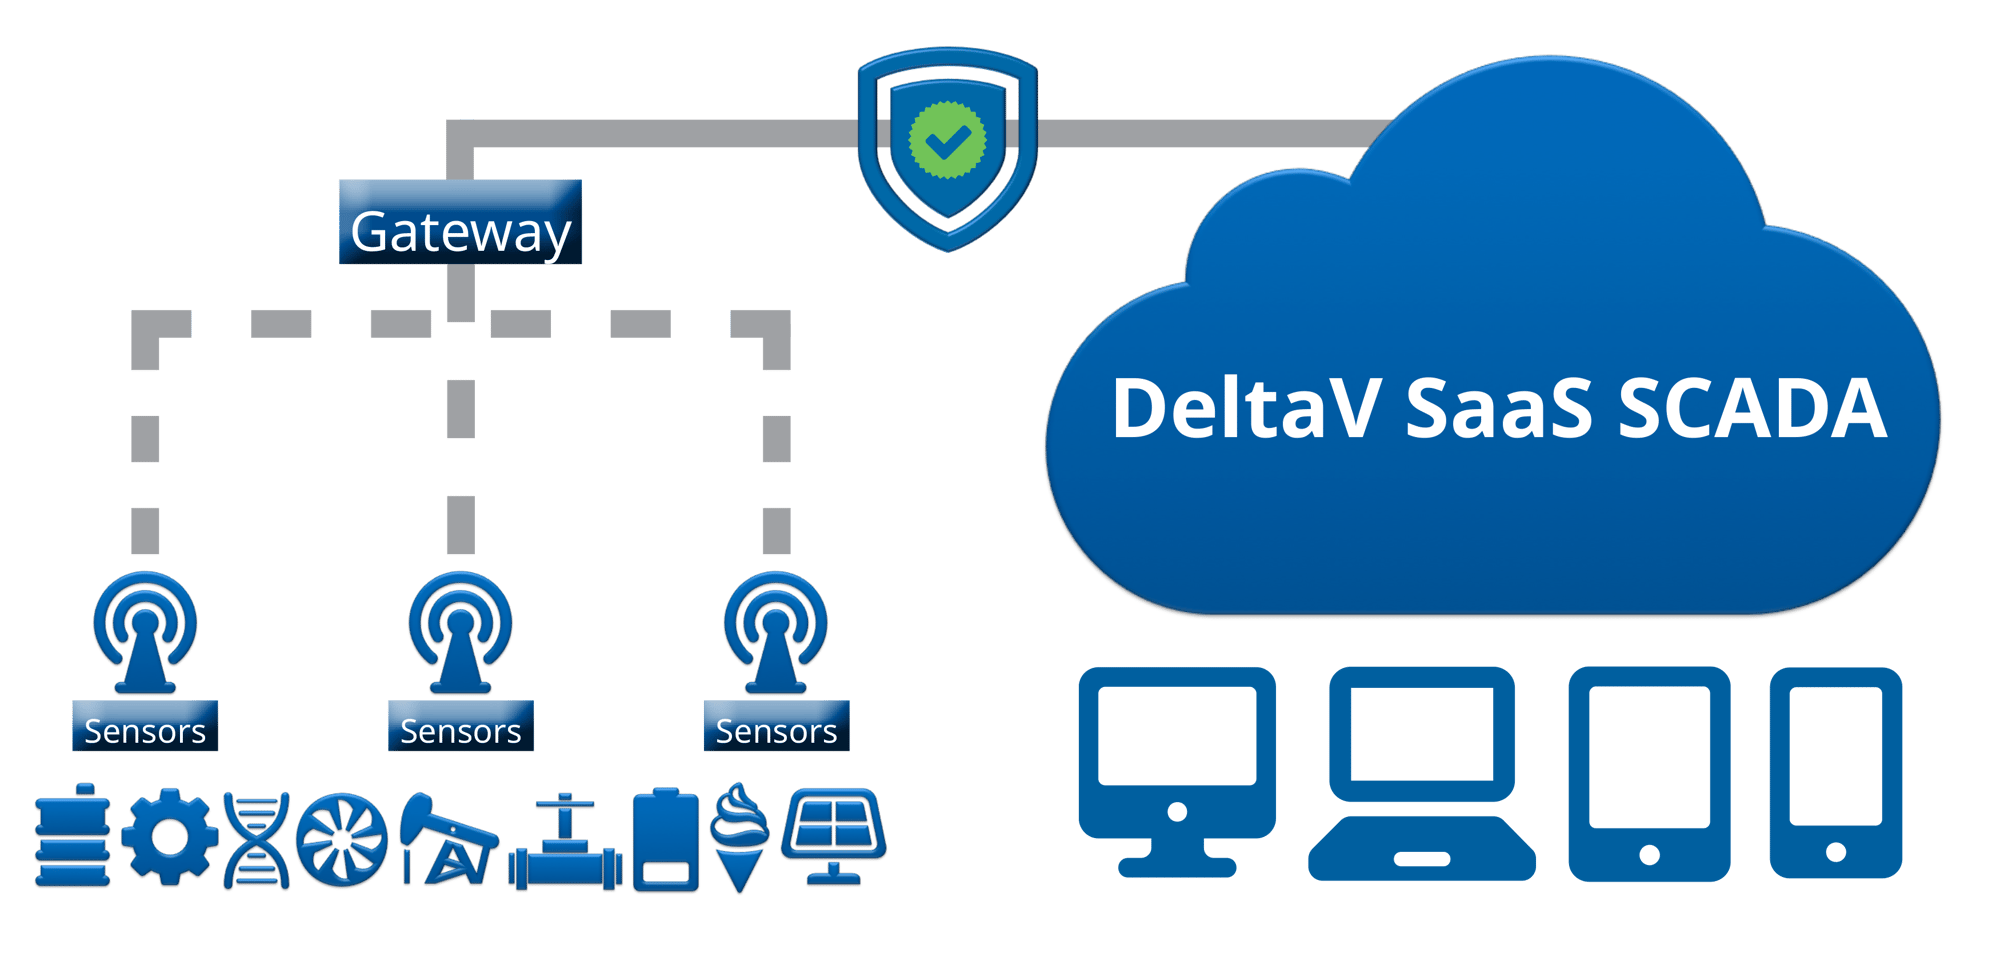 Zedi is now DeltaV SaaS SCADA Worldwide Zedi locations for SaaS SCADA for industries like oil and gas production, water and wastewater utilities, packaging, mining and more